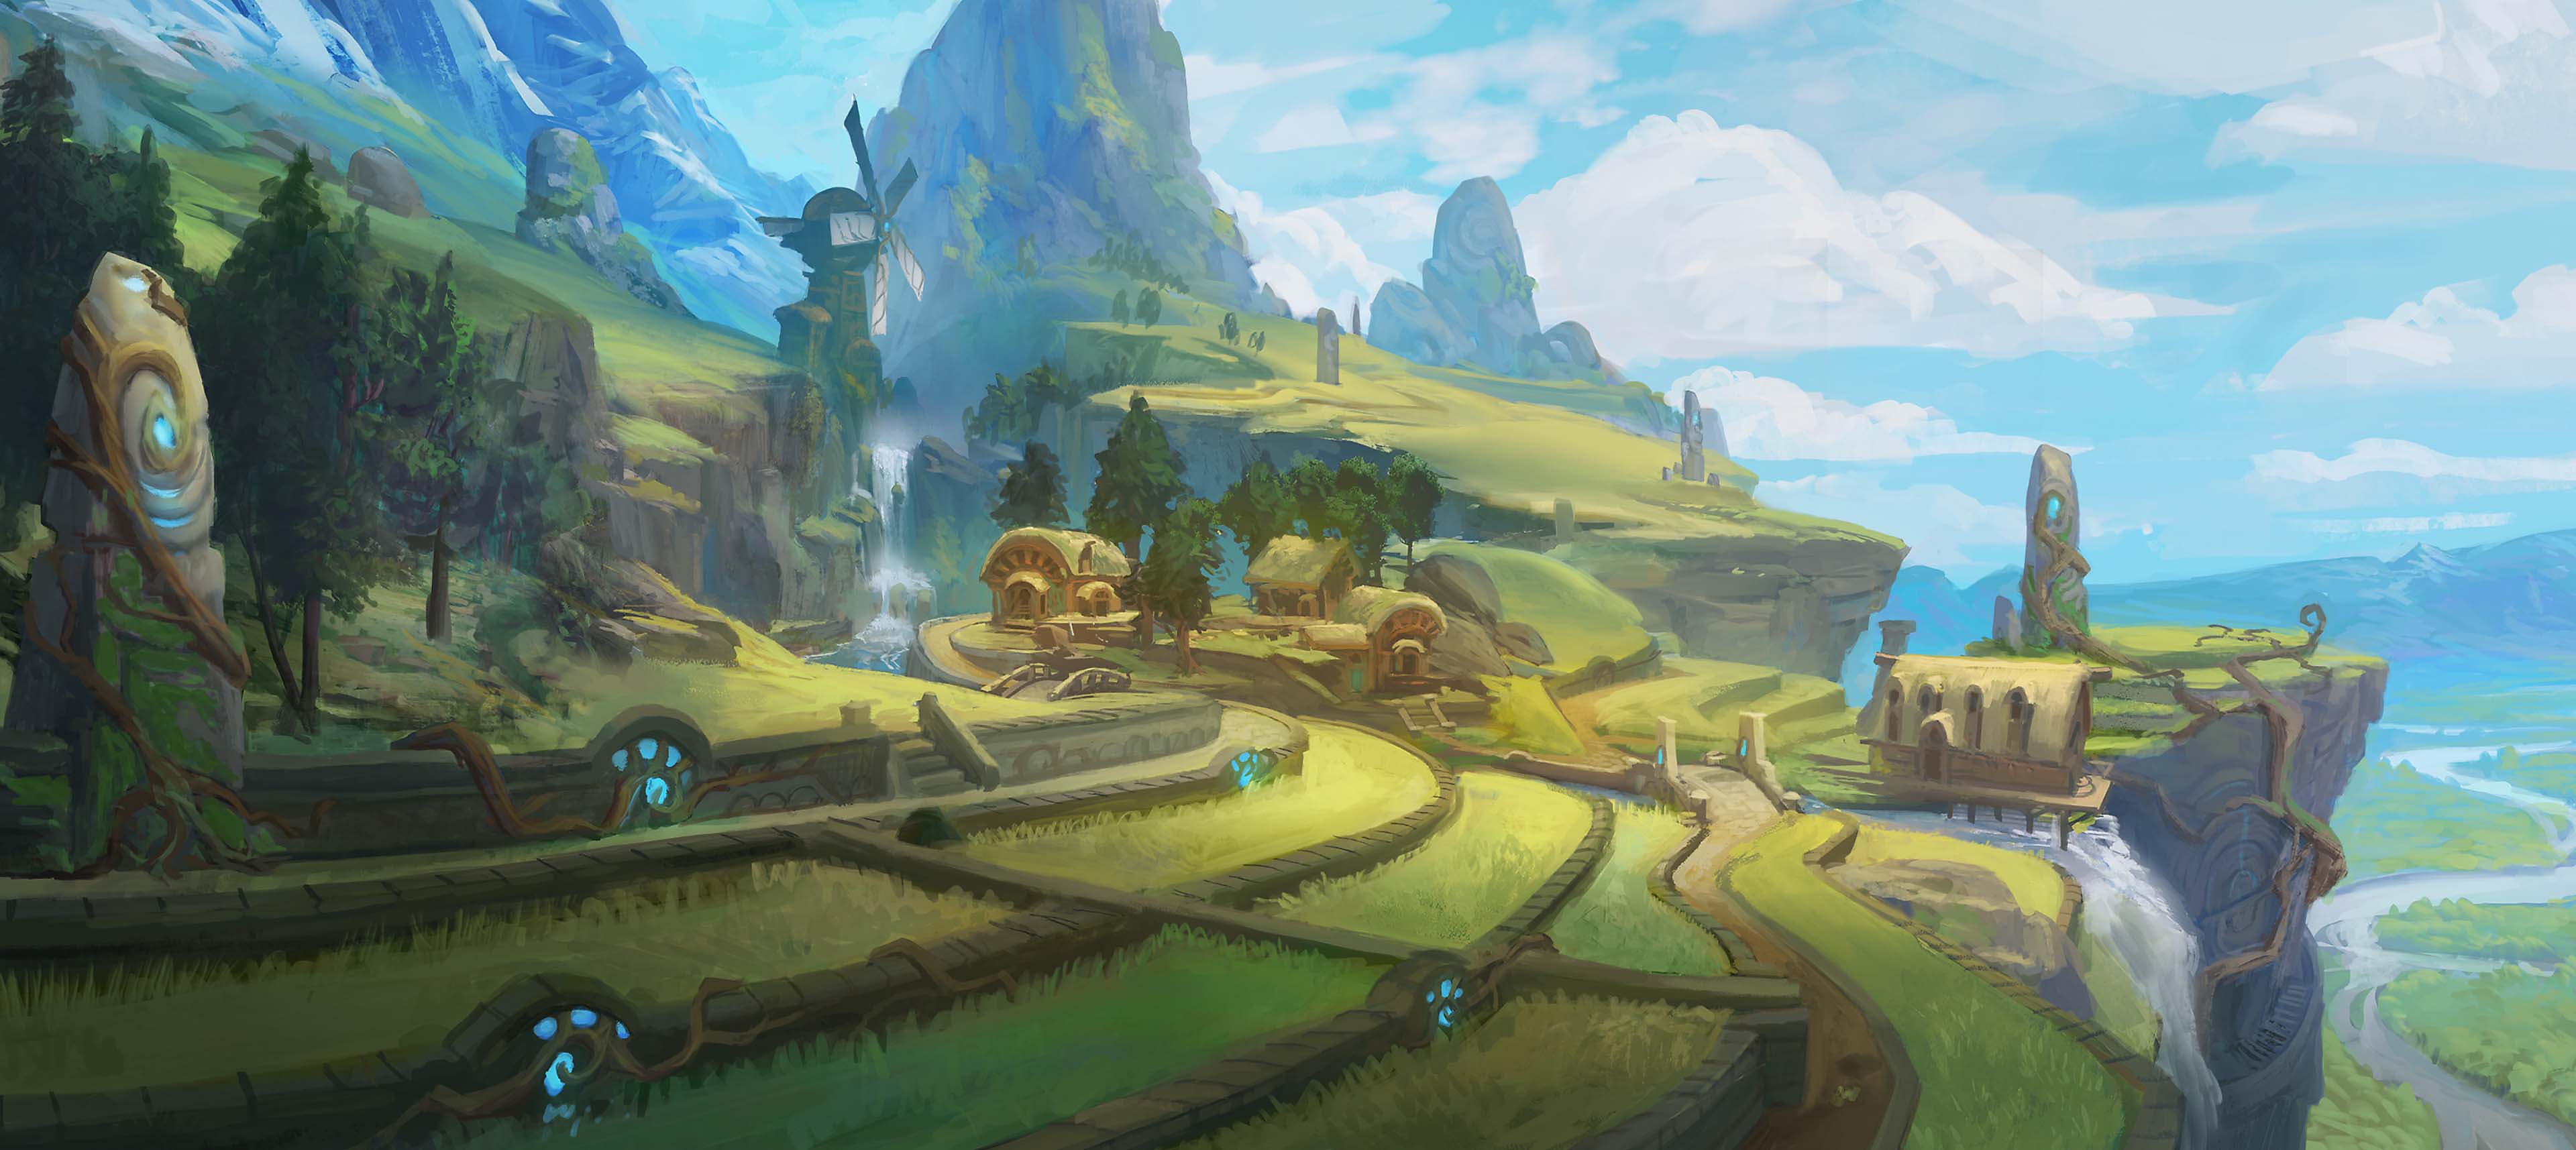 Concept artwork of a small village on a hillside with mountains in the distance